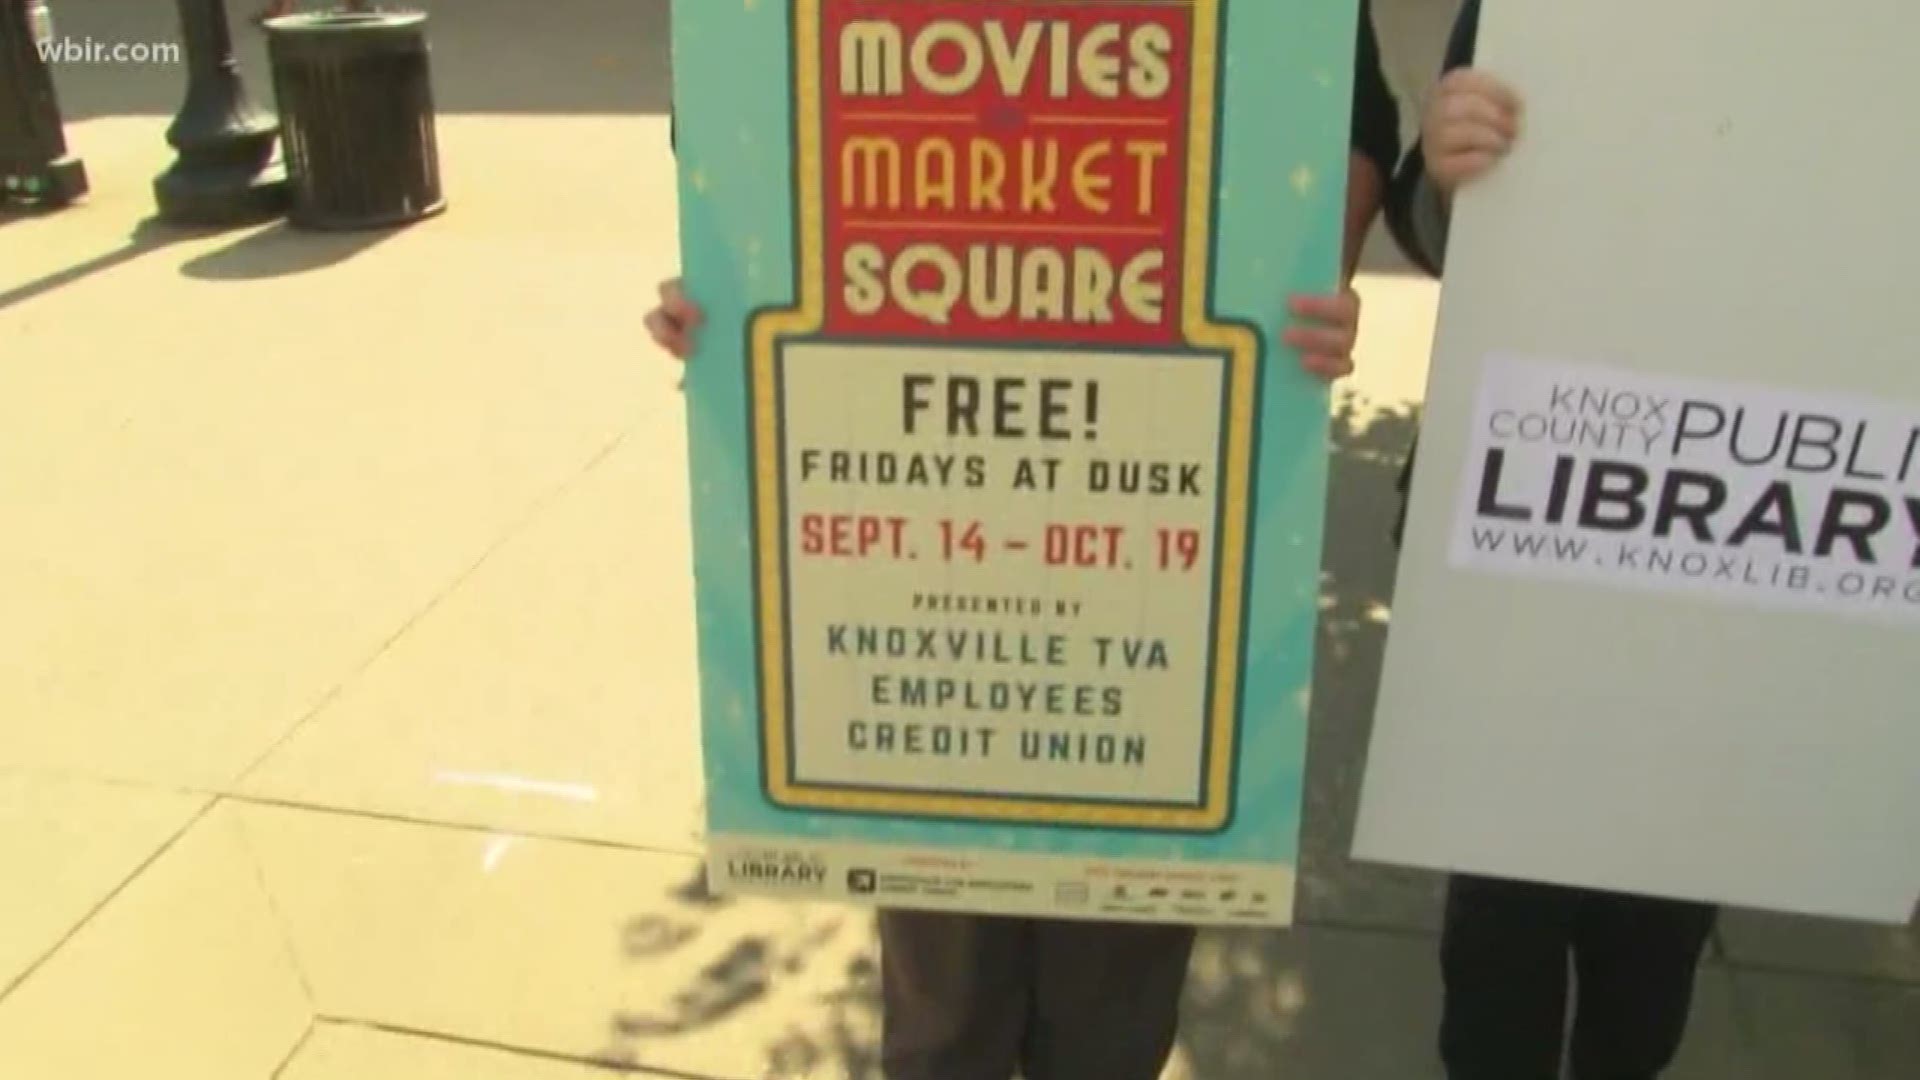 Knox County Public Library reveals the 2018 Fall Schedule for Movies on Market Square.